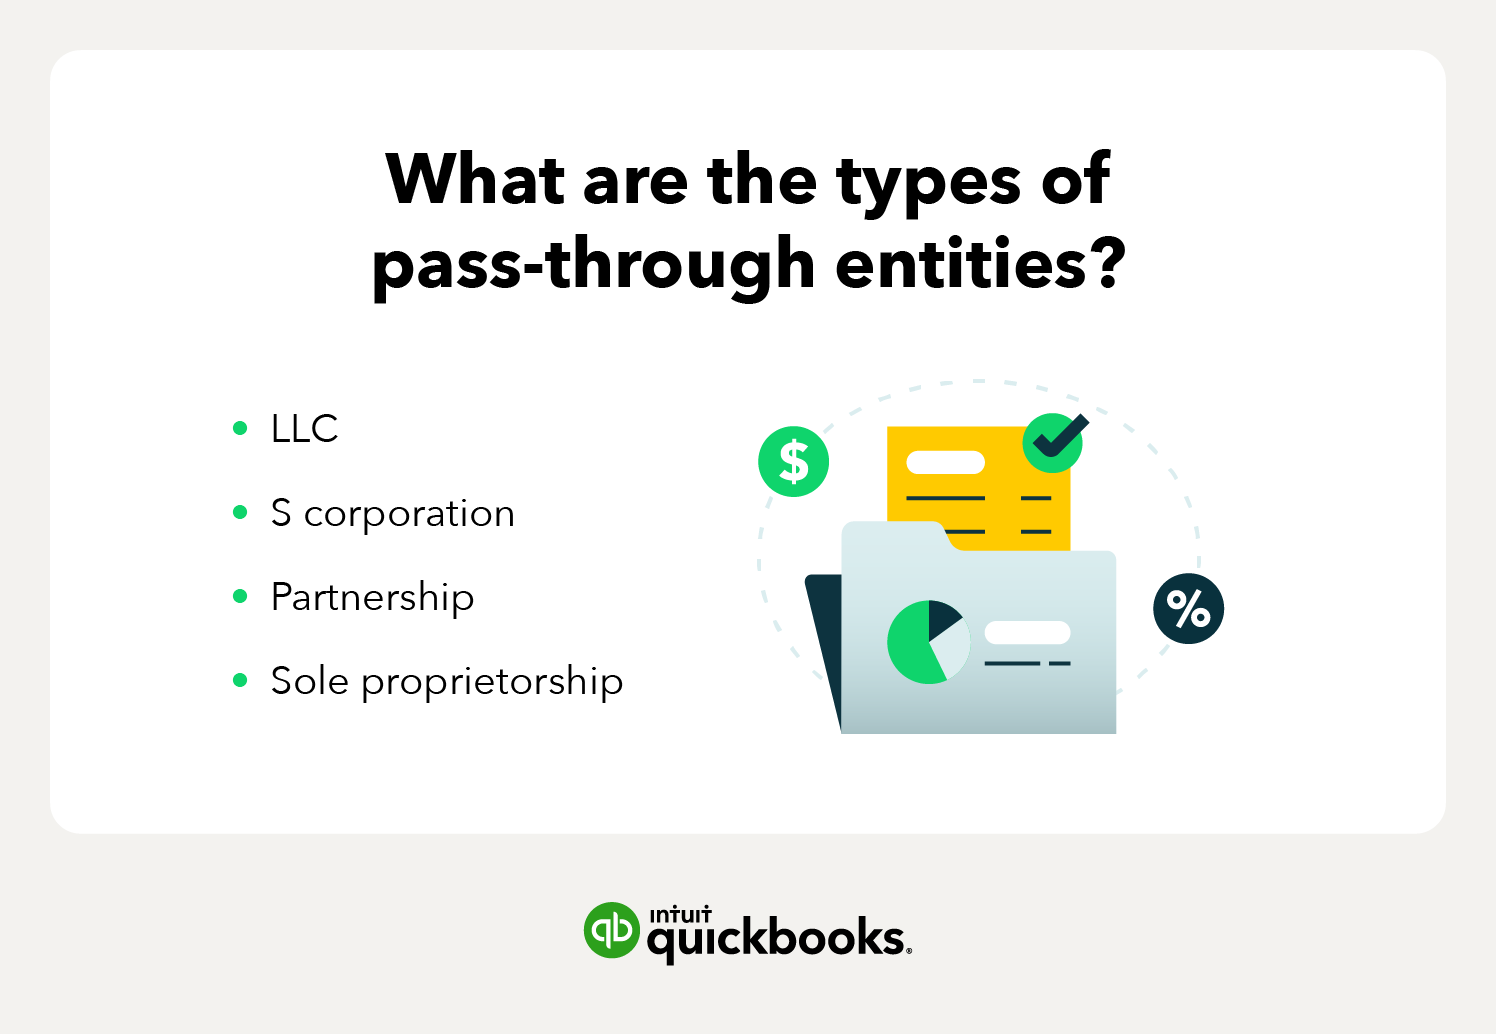 What are the types of pass-through entities? LLC, S corporation, Partnership, Sole proprietorship